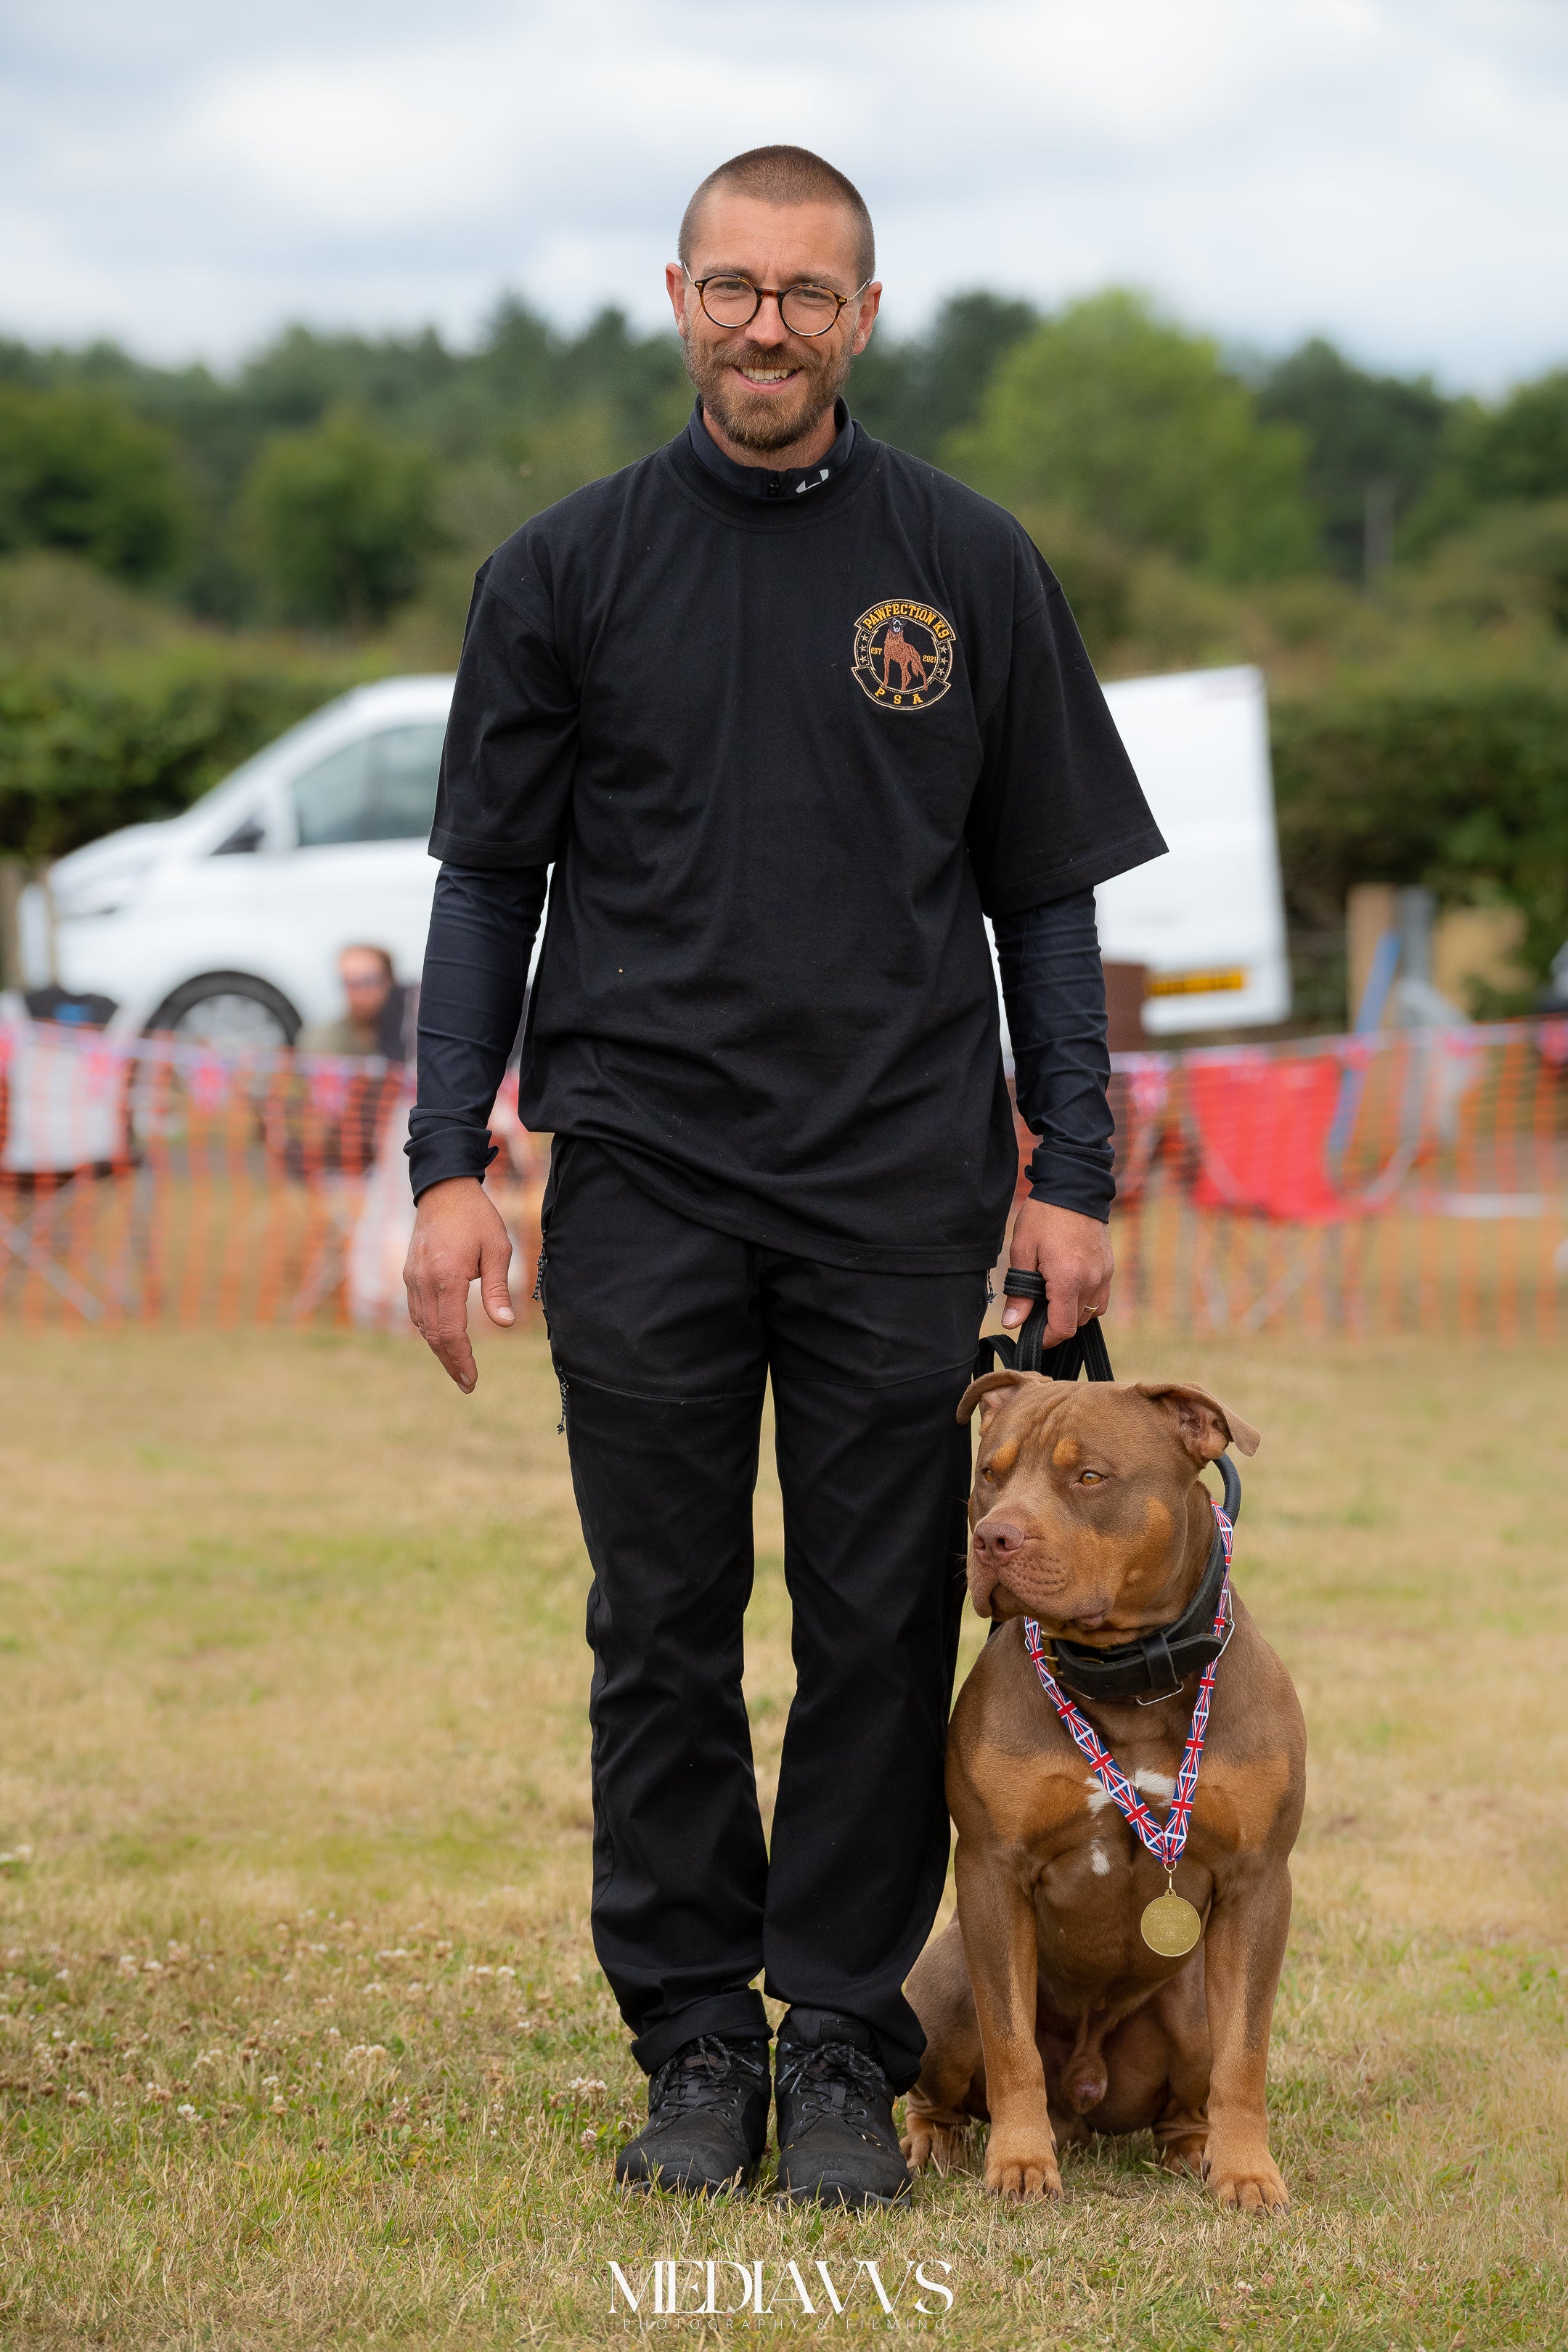 Professional dog trainer Chris Halls with his XL bully Odin, who has won awards in PSA competitions